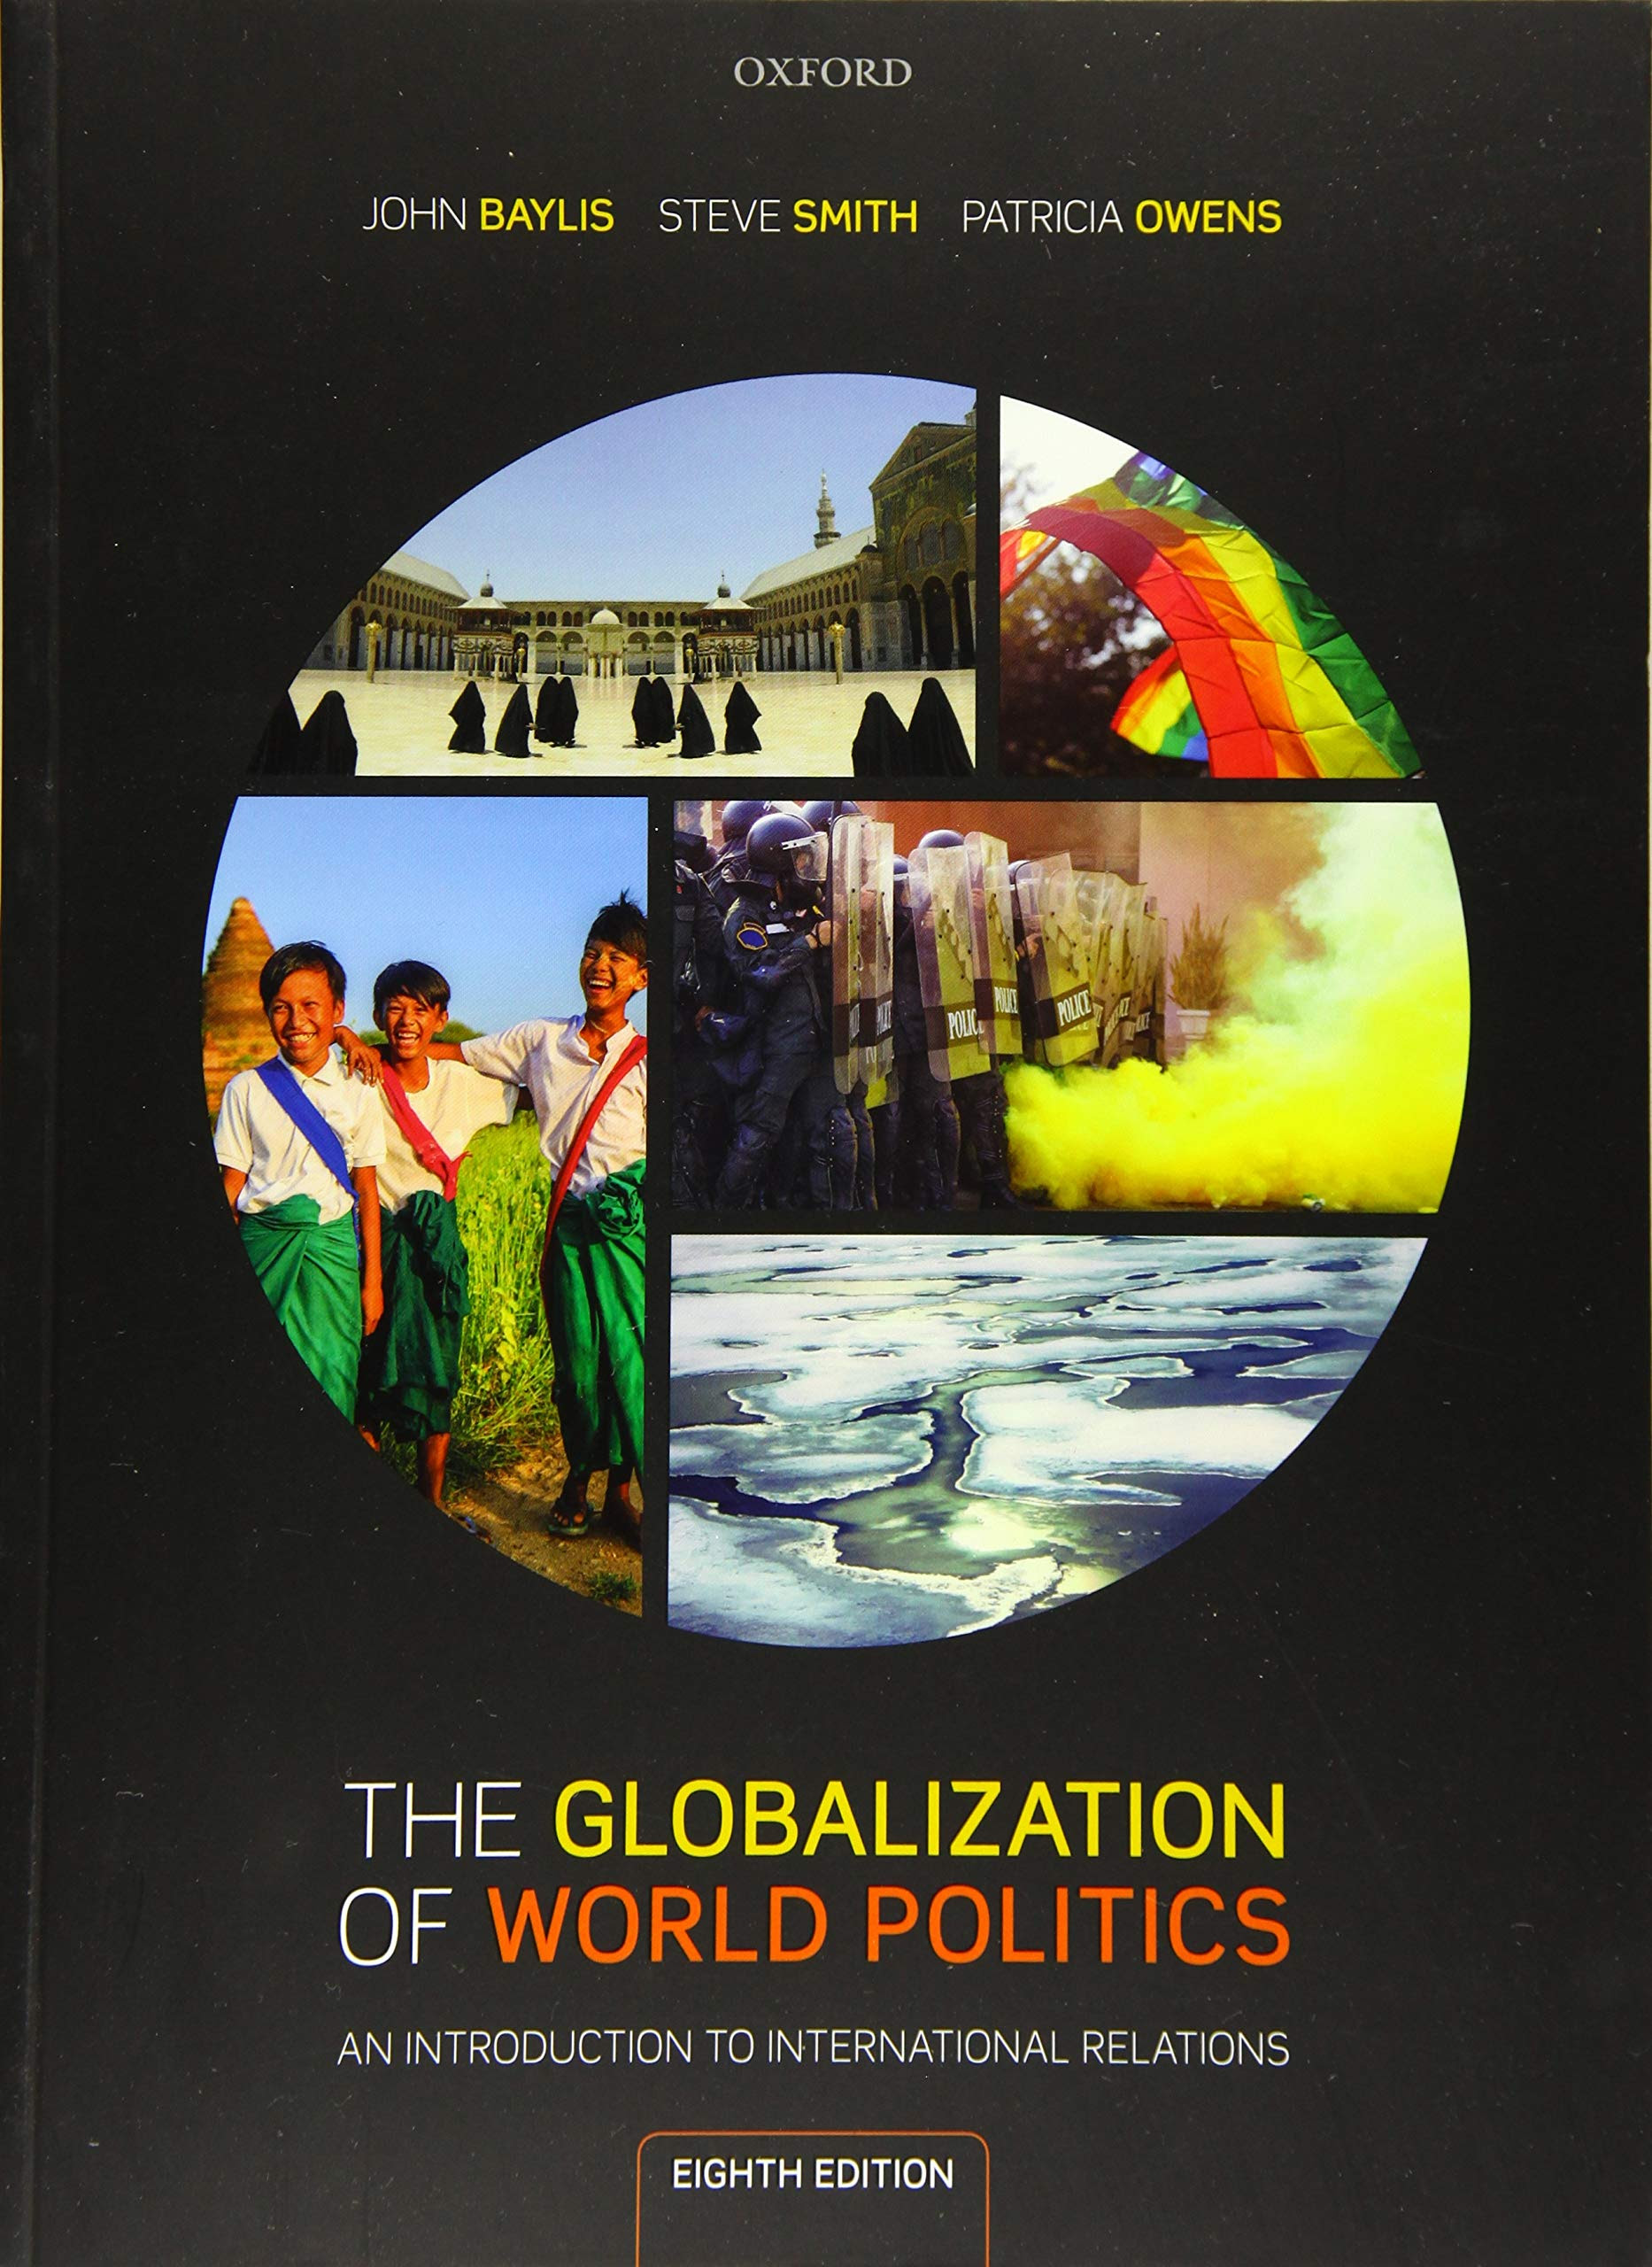 The Globalization of World Politics: An Introduction to International Relations PDF